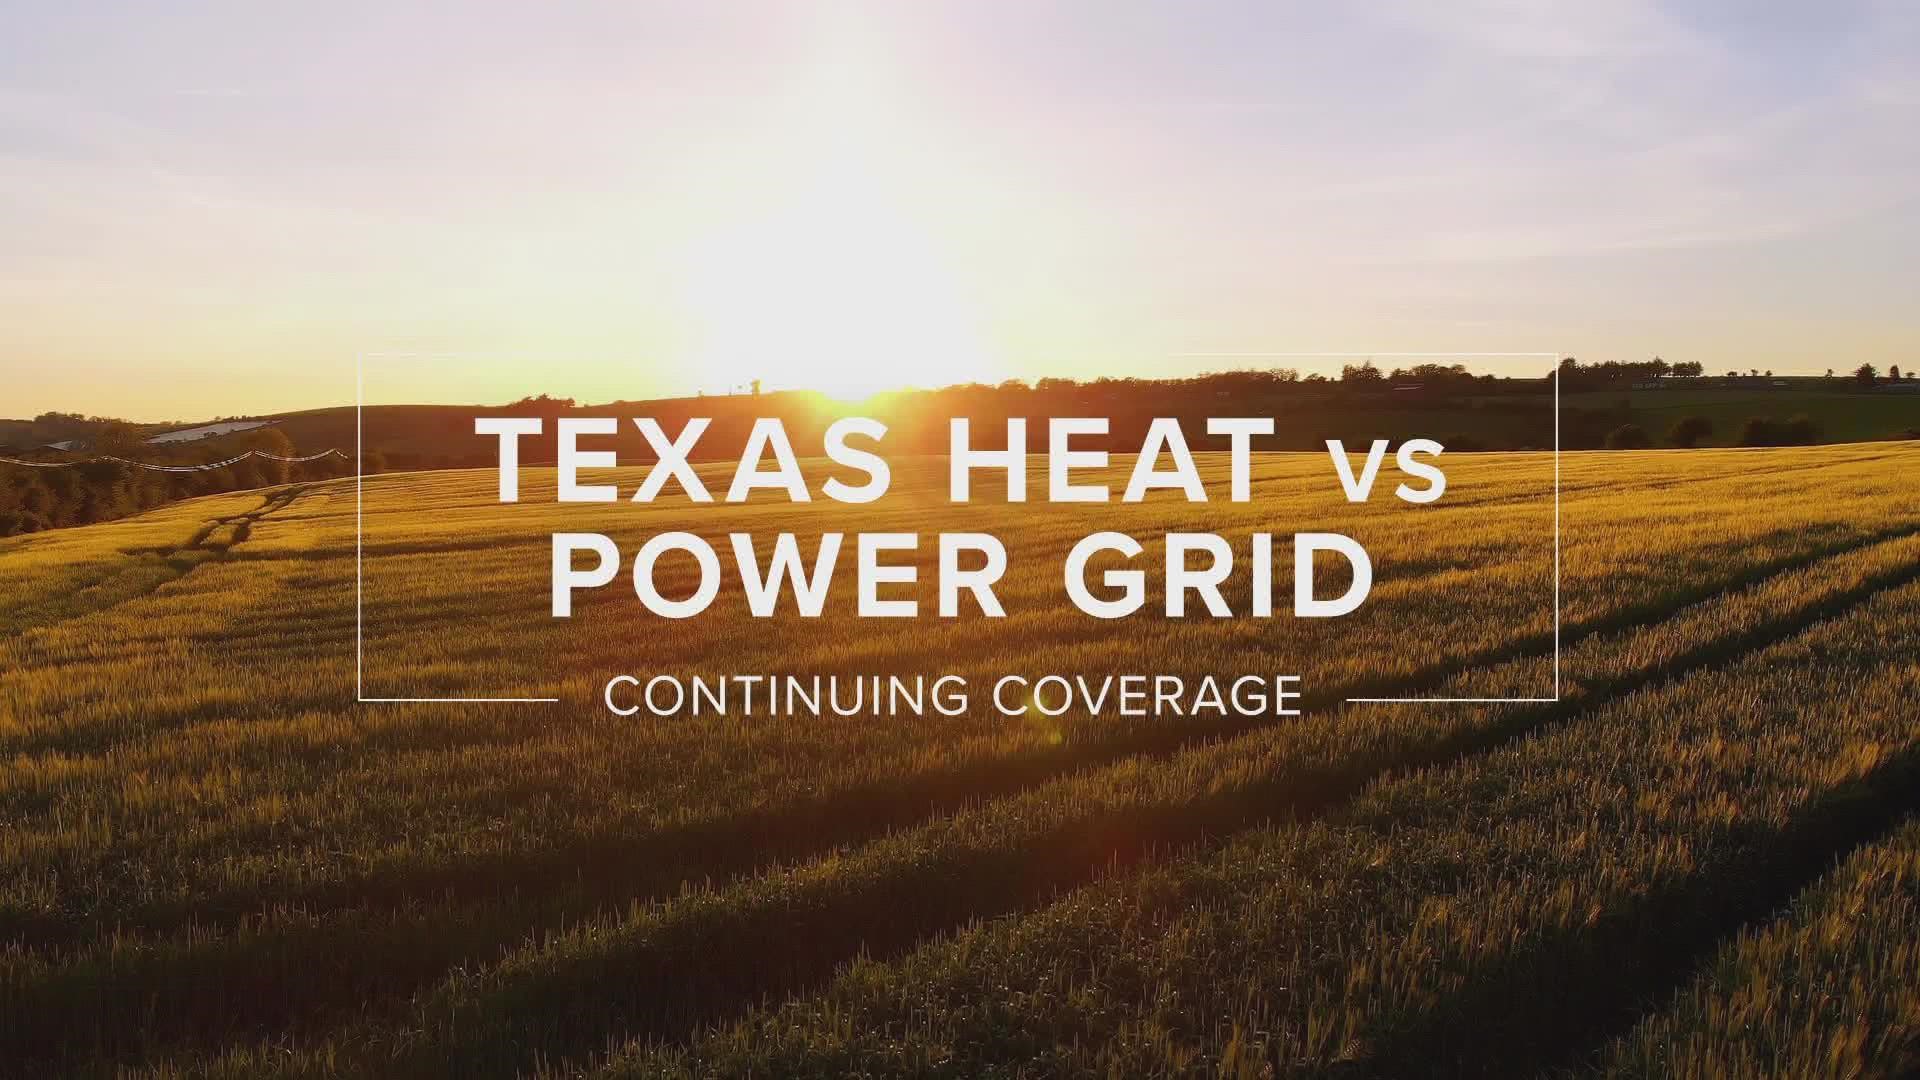 What's happening with the grid and are we seeing emergency conditions or not? 6 News asked ERCOT some questions to break down the data.